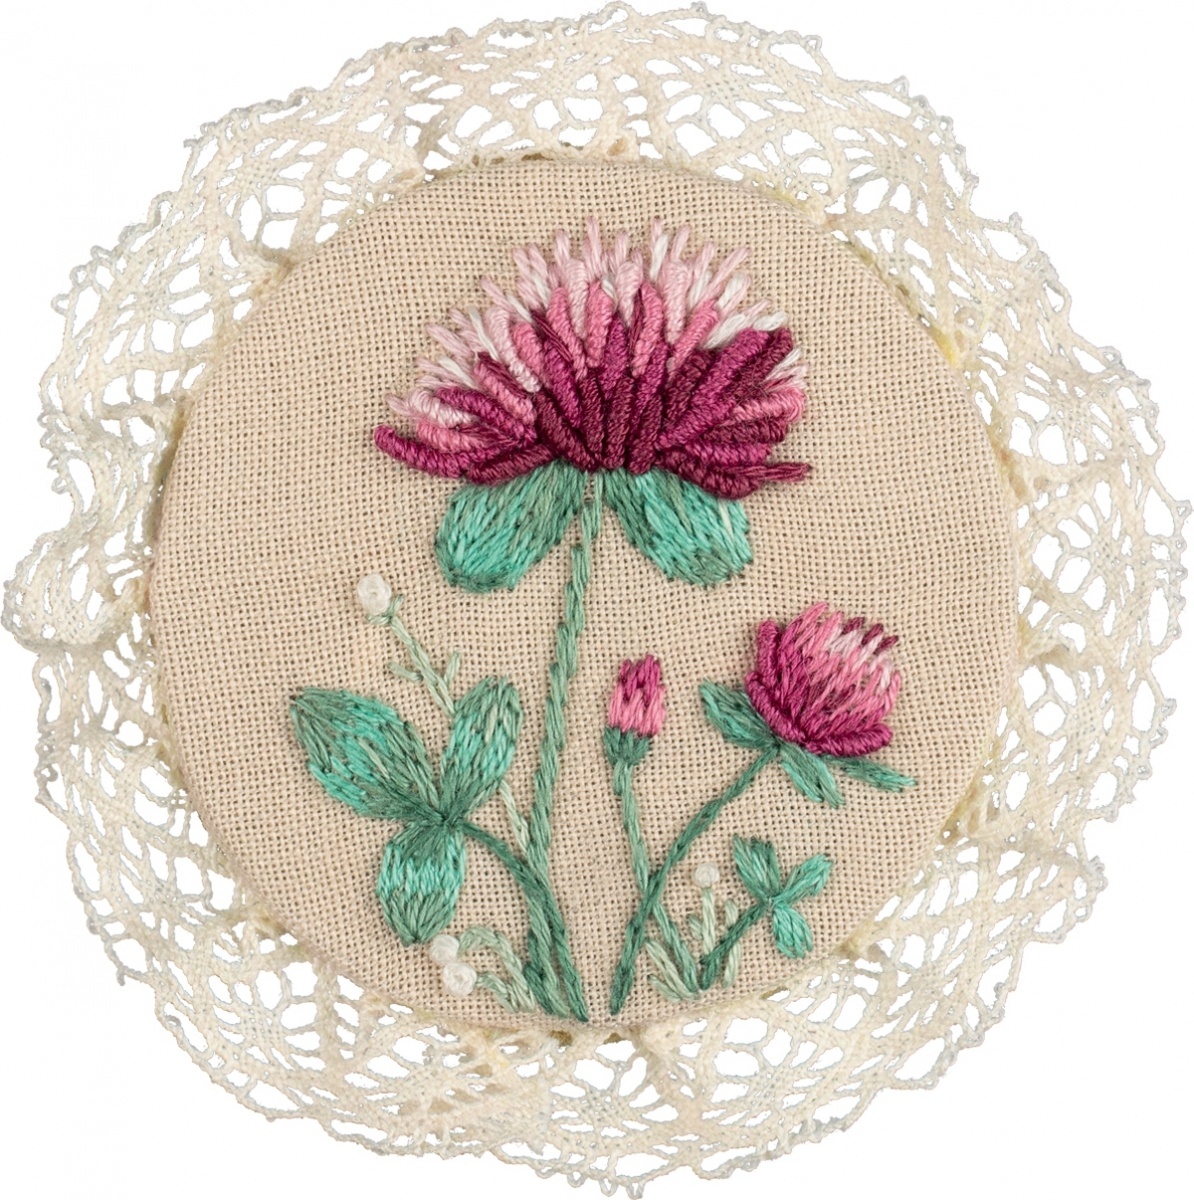 Vintage Brooches. Clover and Sweet Pea Embroidery Kit фото 5